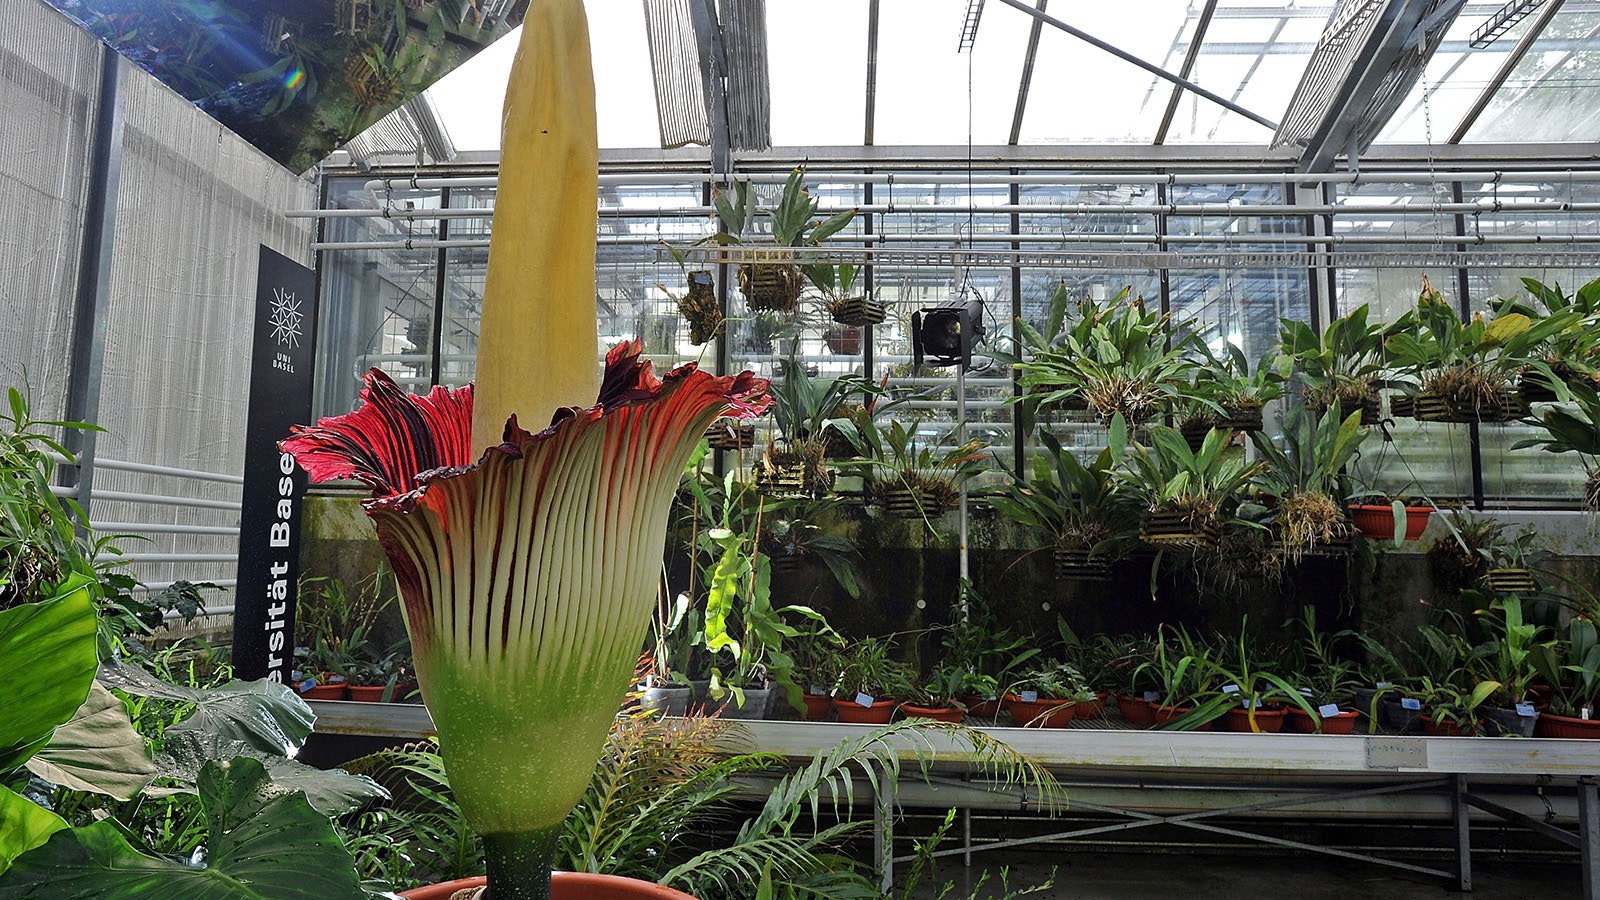 This file photo shows a titan arum flower, the largest unbranched inflorescence flowering plant in the world, in bloom at Basel University on April 23, 2011, in Basel, Switzerland.